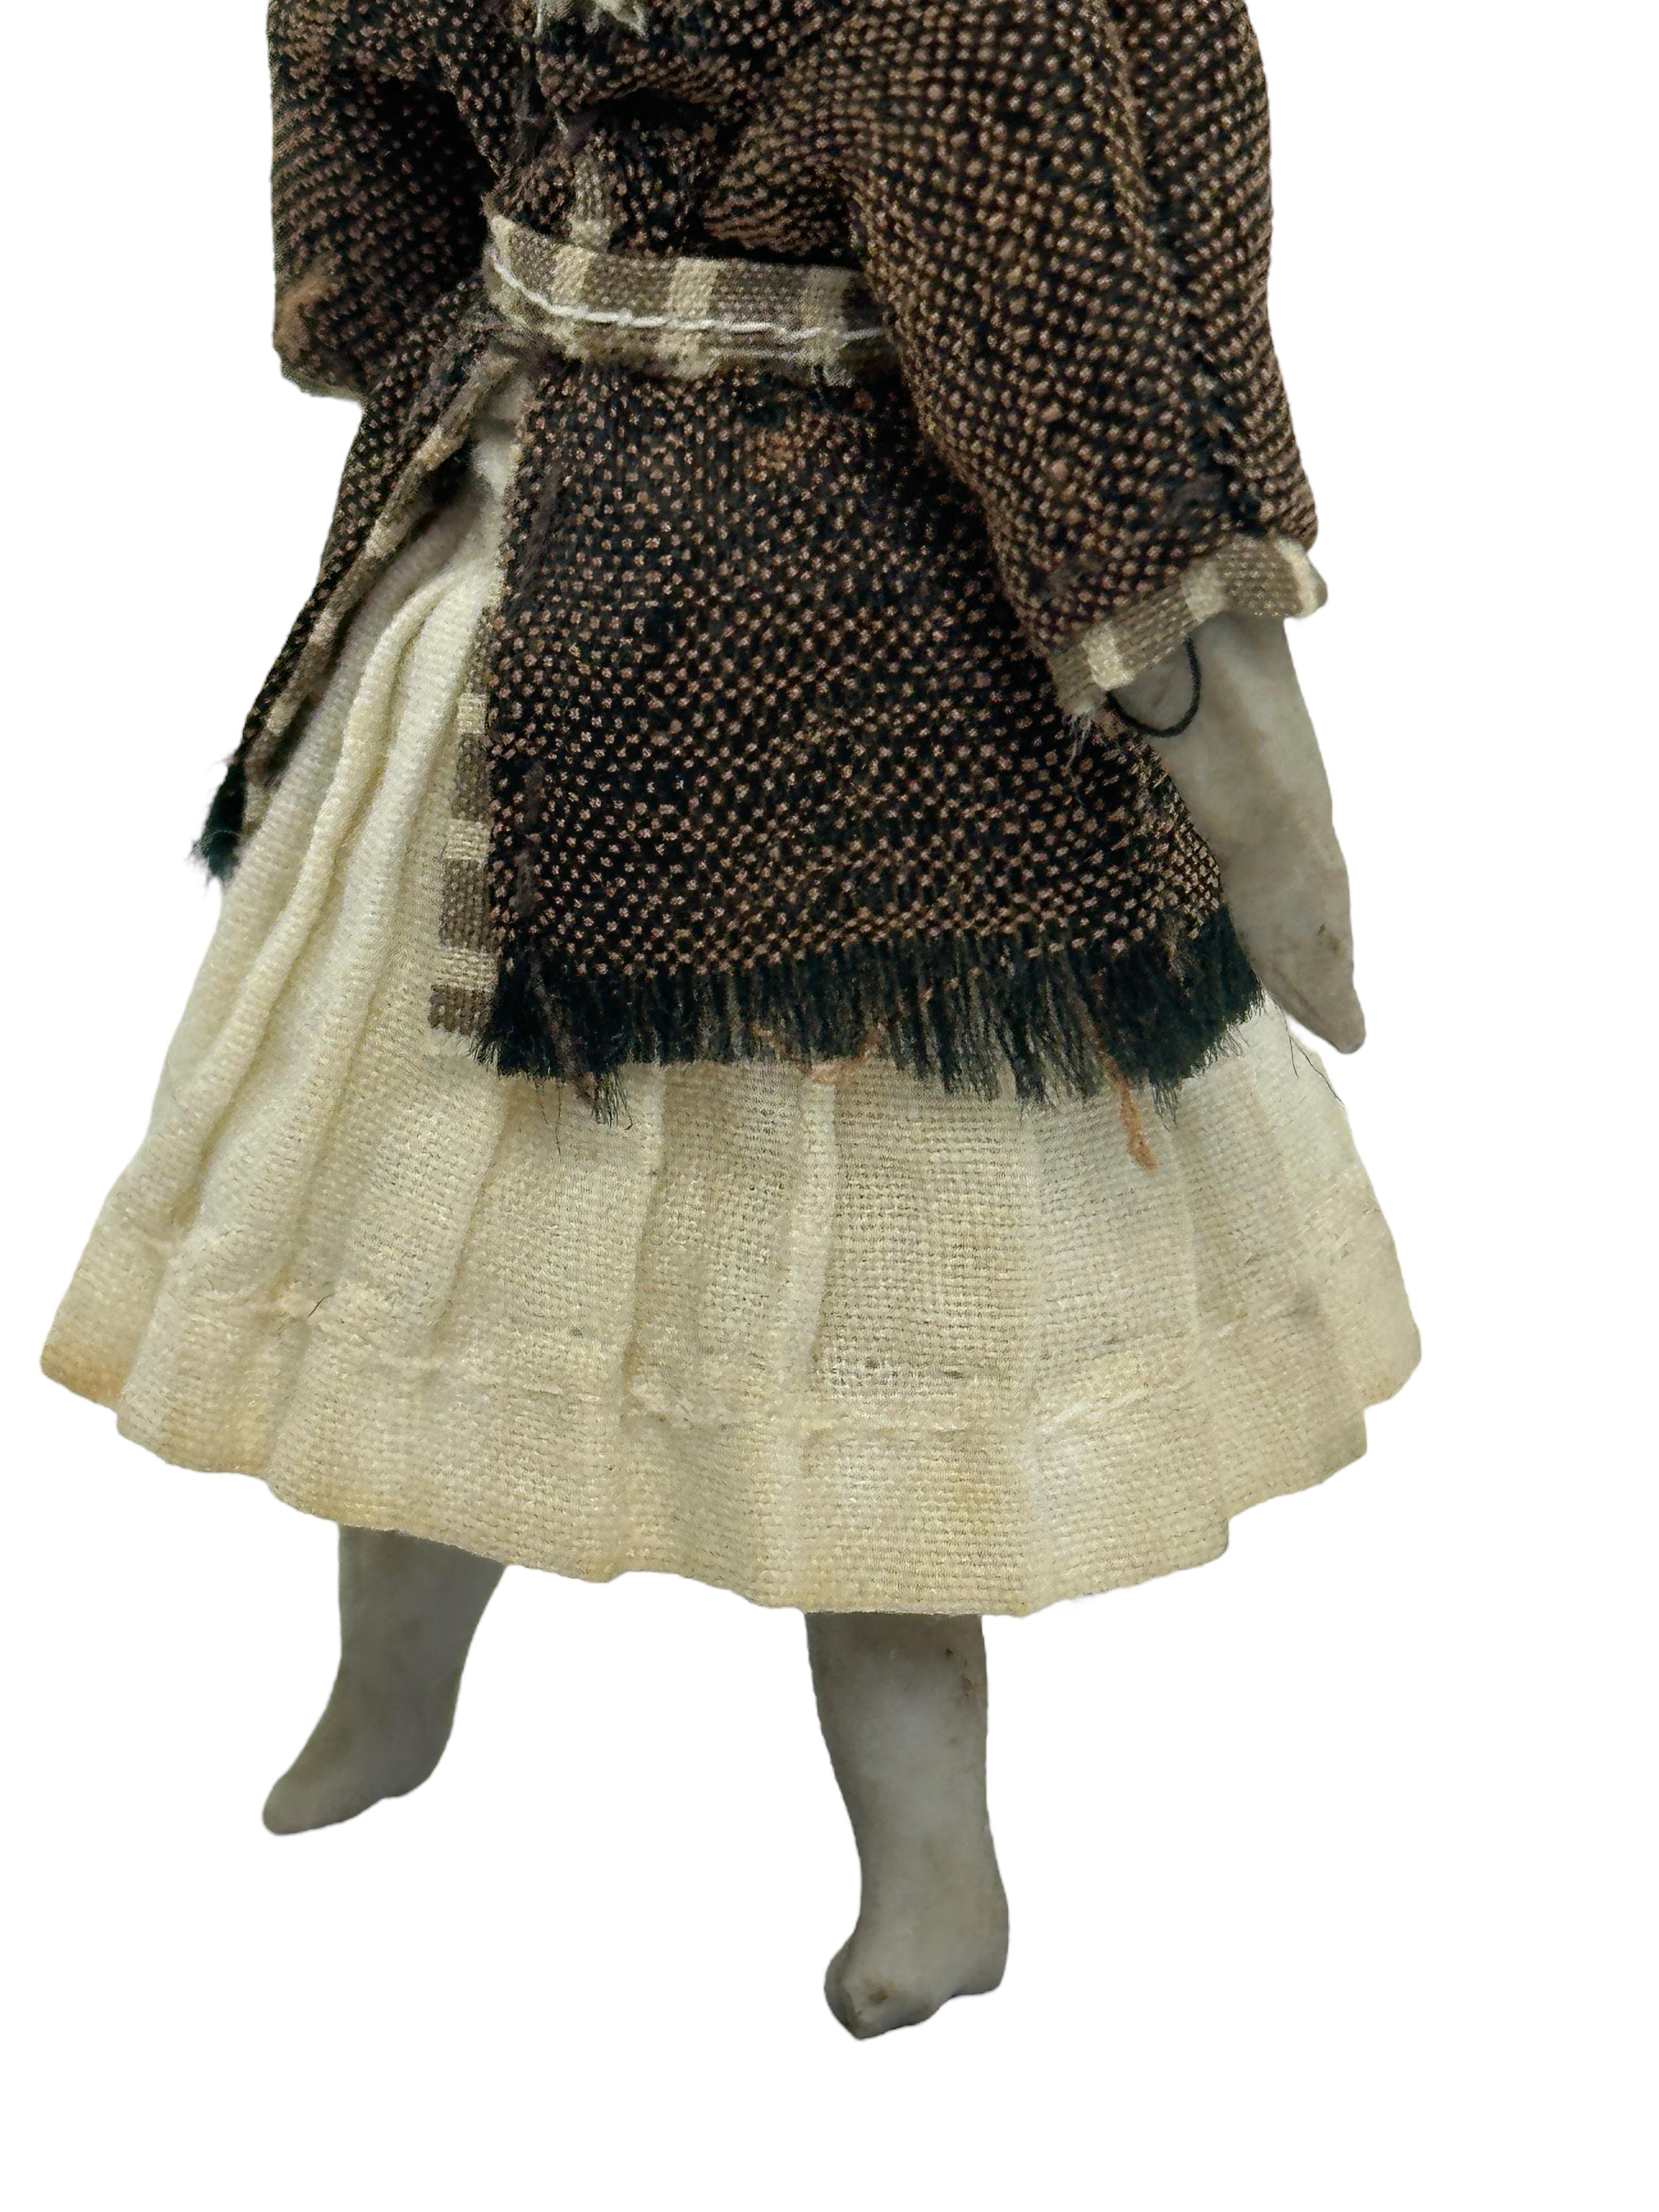 Girl in beautiful Dress, Antique German Dollhouse Doll Toy 1900s For Sale 2